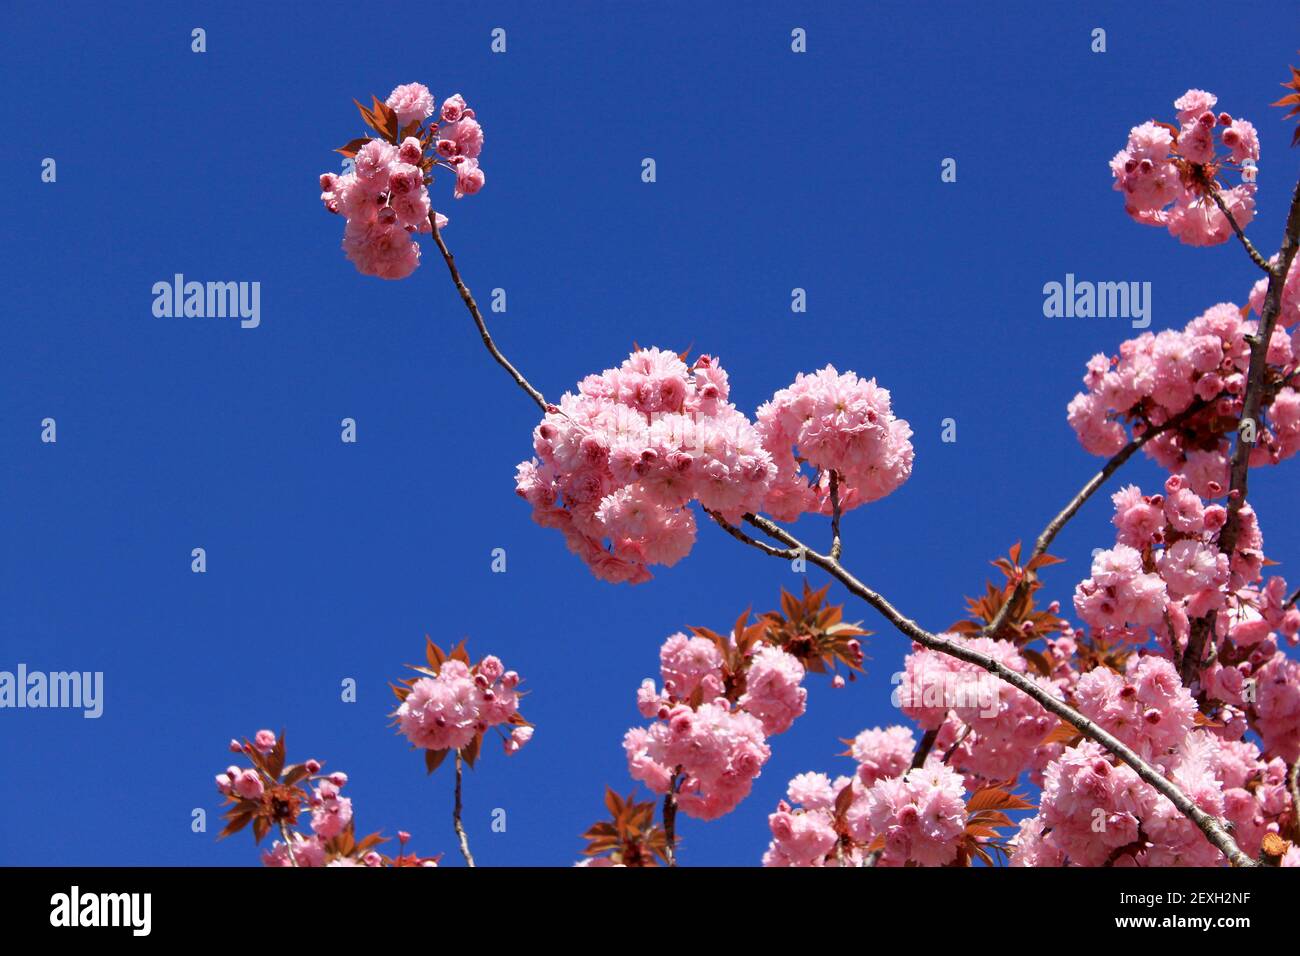 Tree with pink flowers Stock Photo